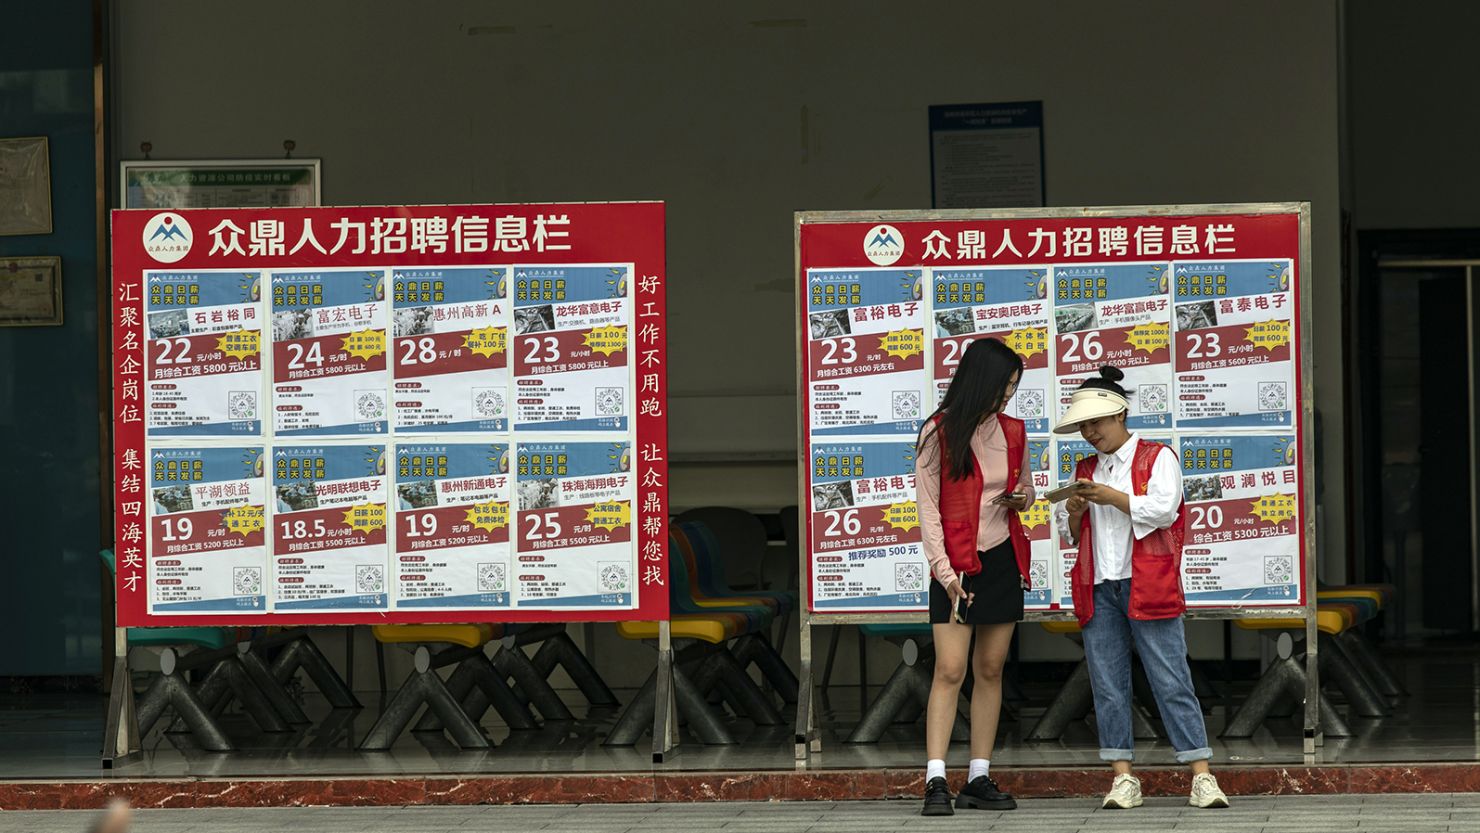 Job postings at a bus station that also serves as a recruitment center in Shenzhen, China, on August 9. 